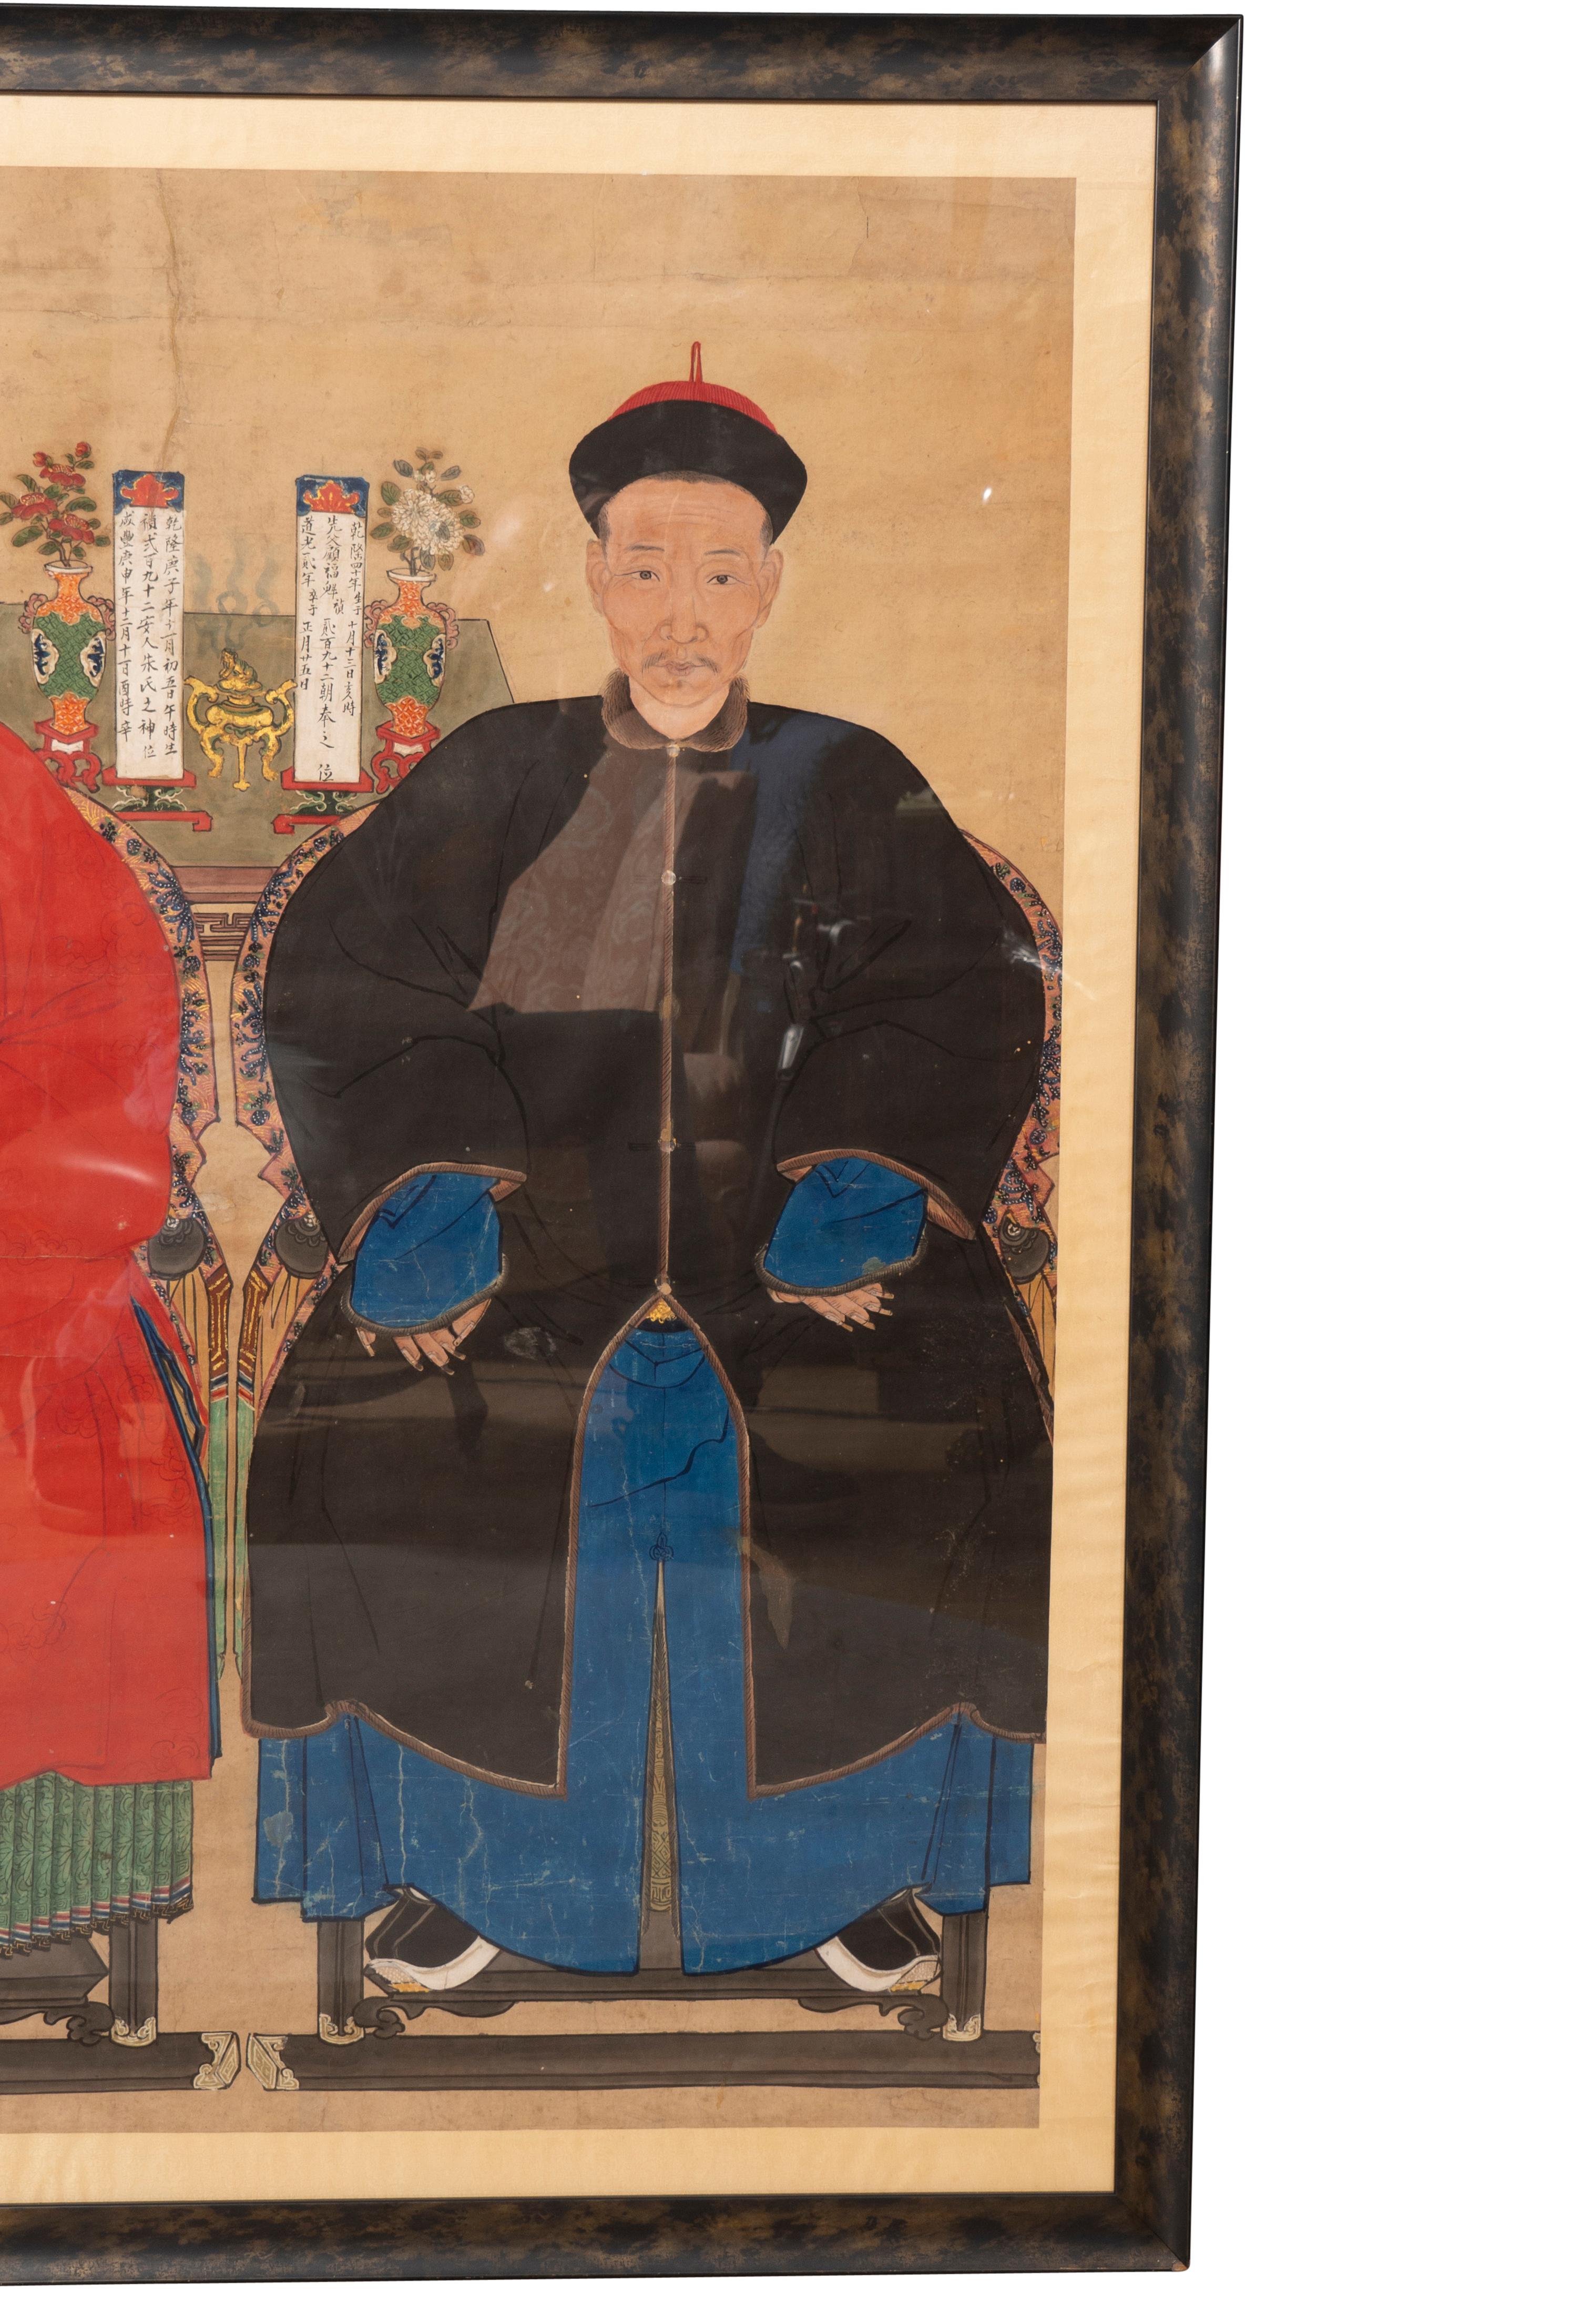 Framed Chinese Ancestor Portrait In Good Condition For Sale In Essex, MA